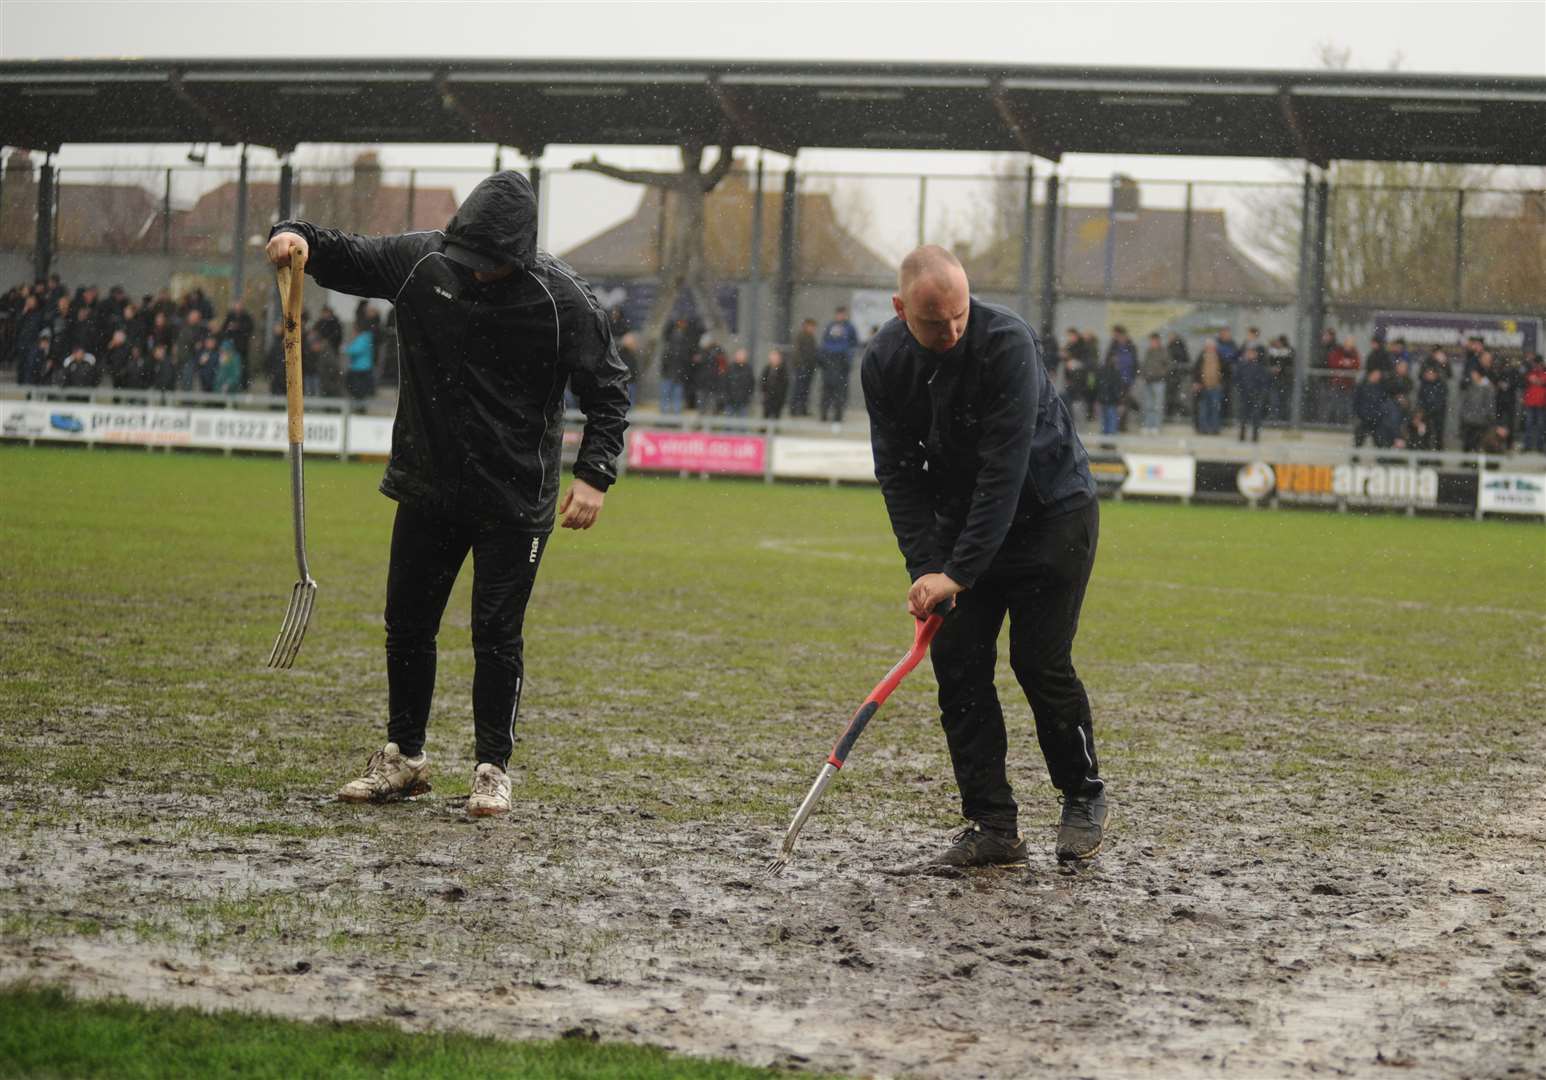 Dartford's ground staff work on the pitch during half-time Picture: Steve Crispe